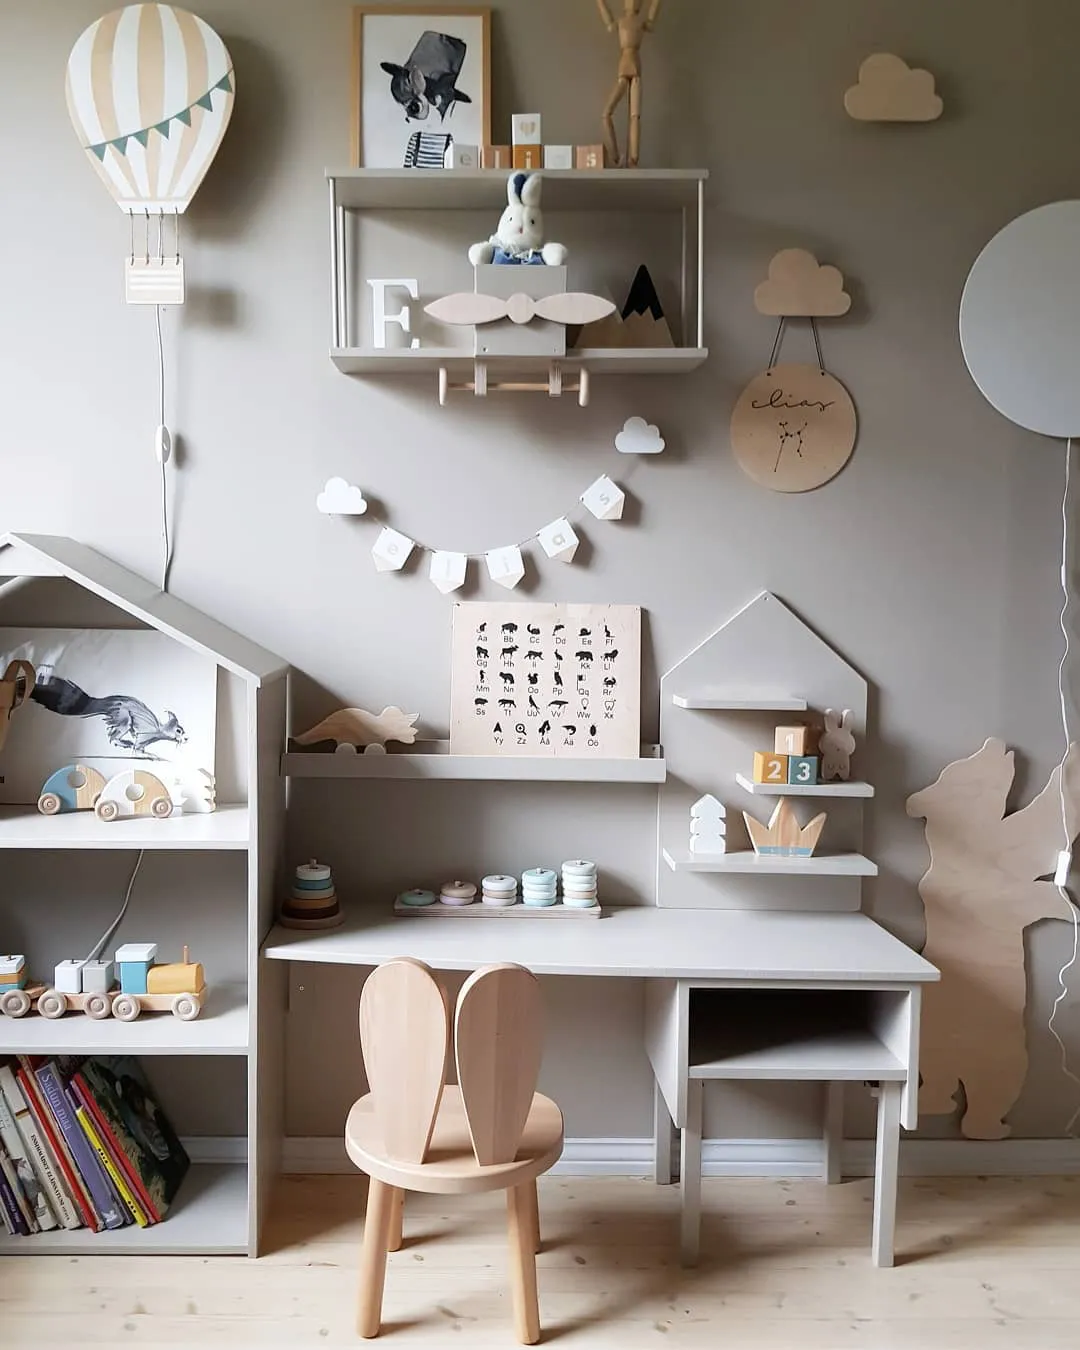 Greige kidsroom with wooden toys